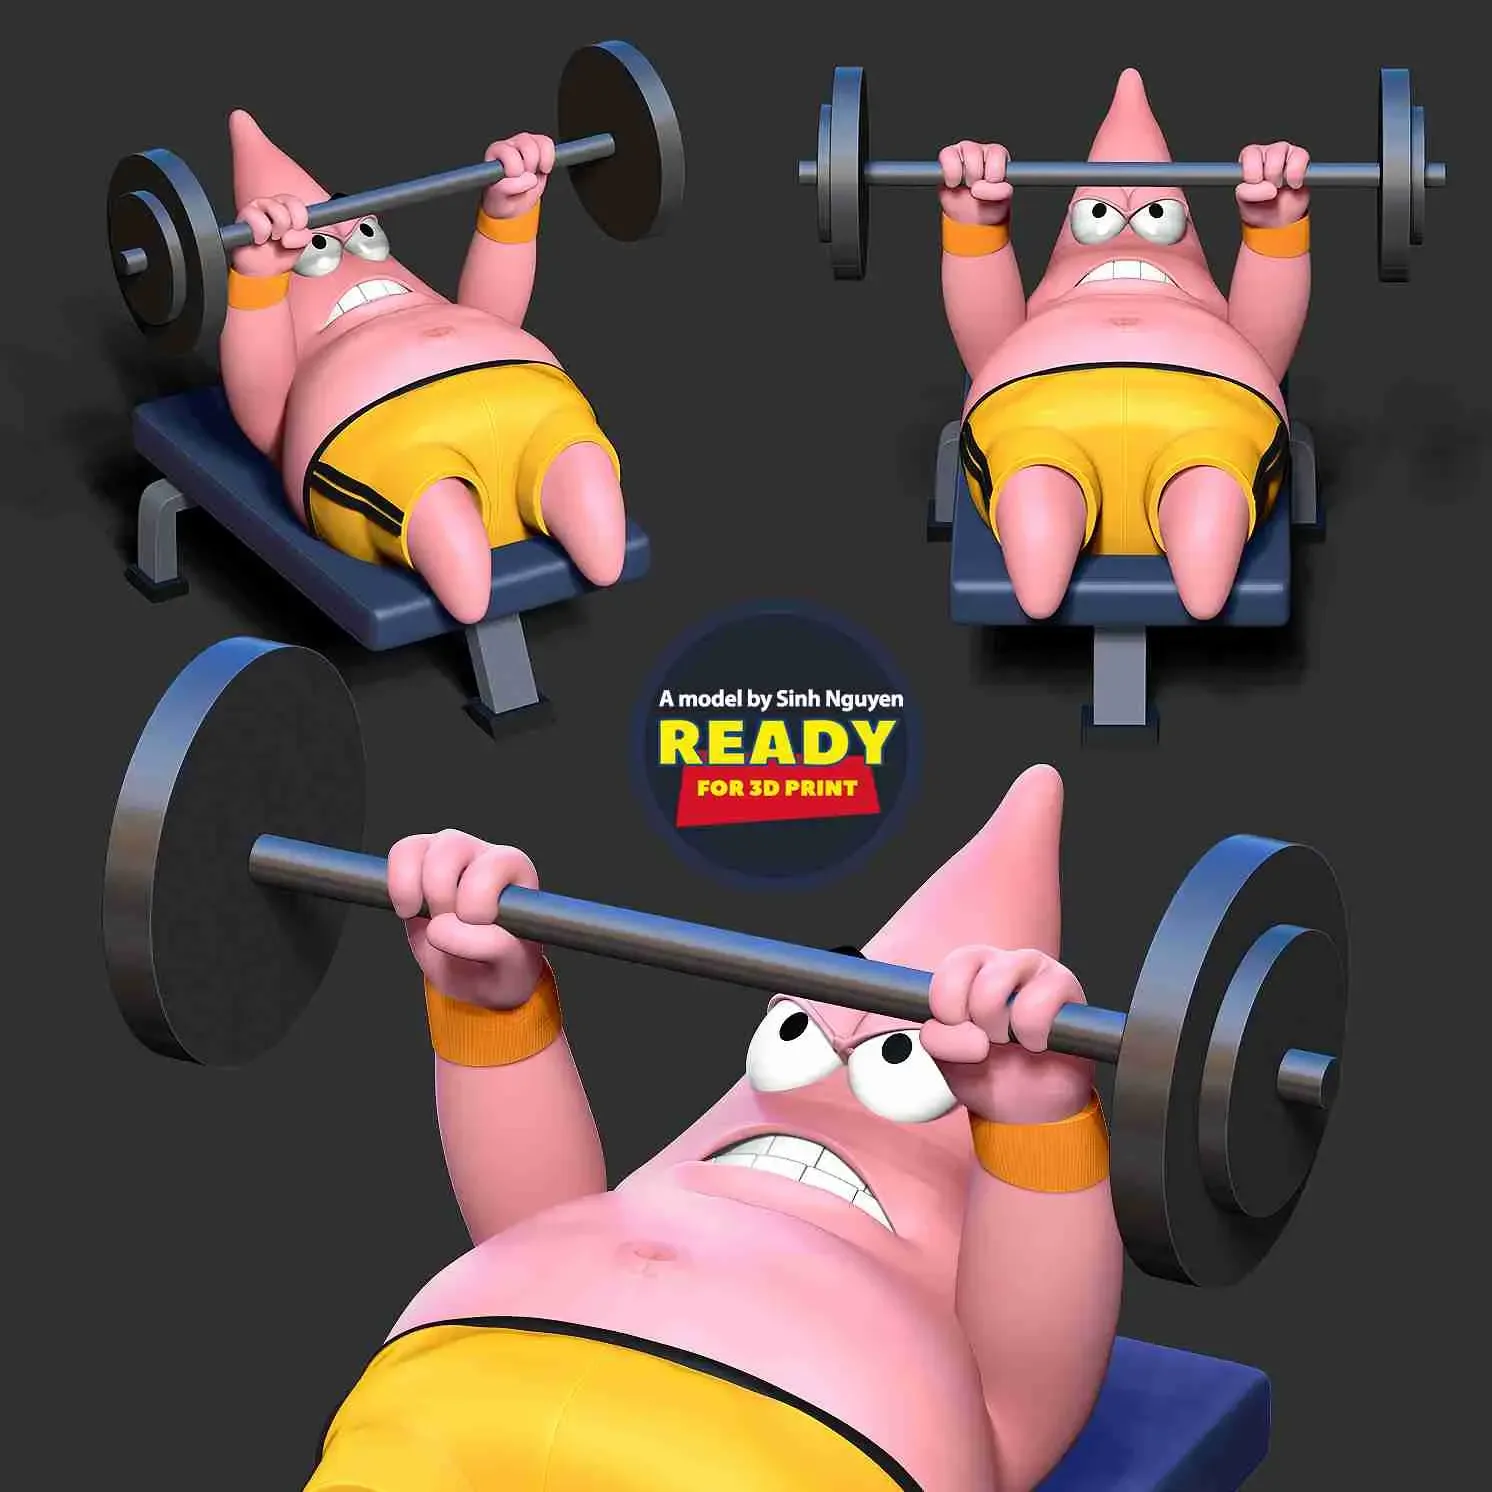 Patrick Star lifts weights